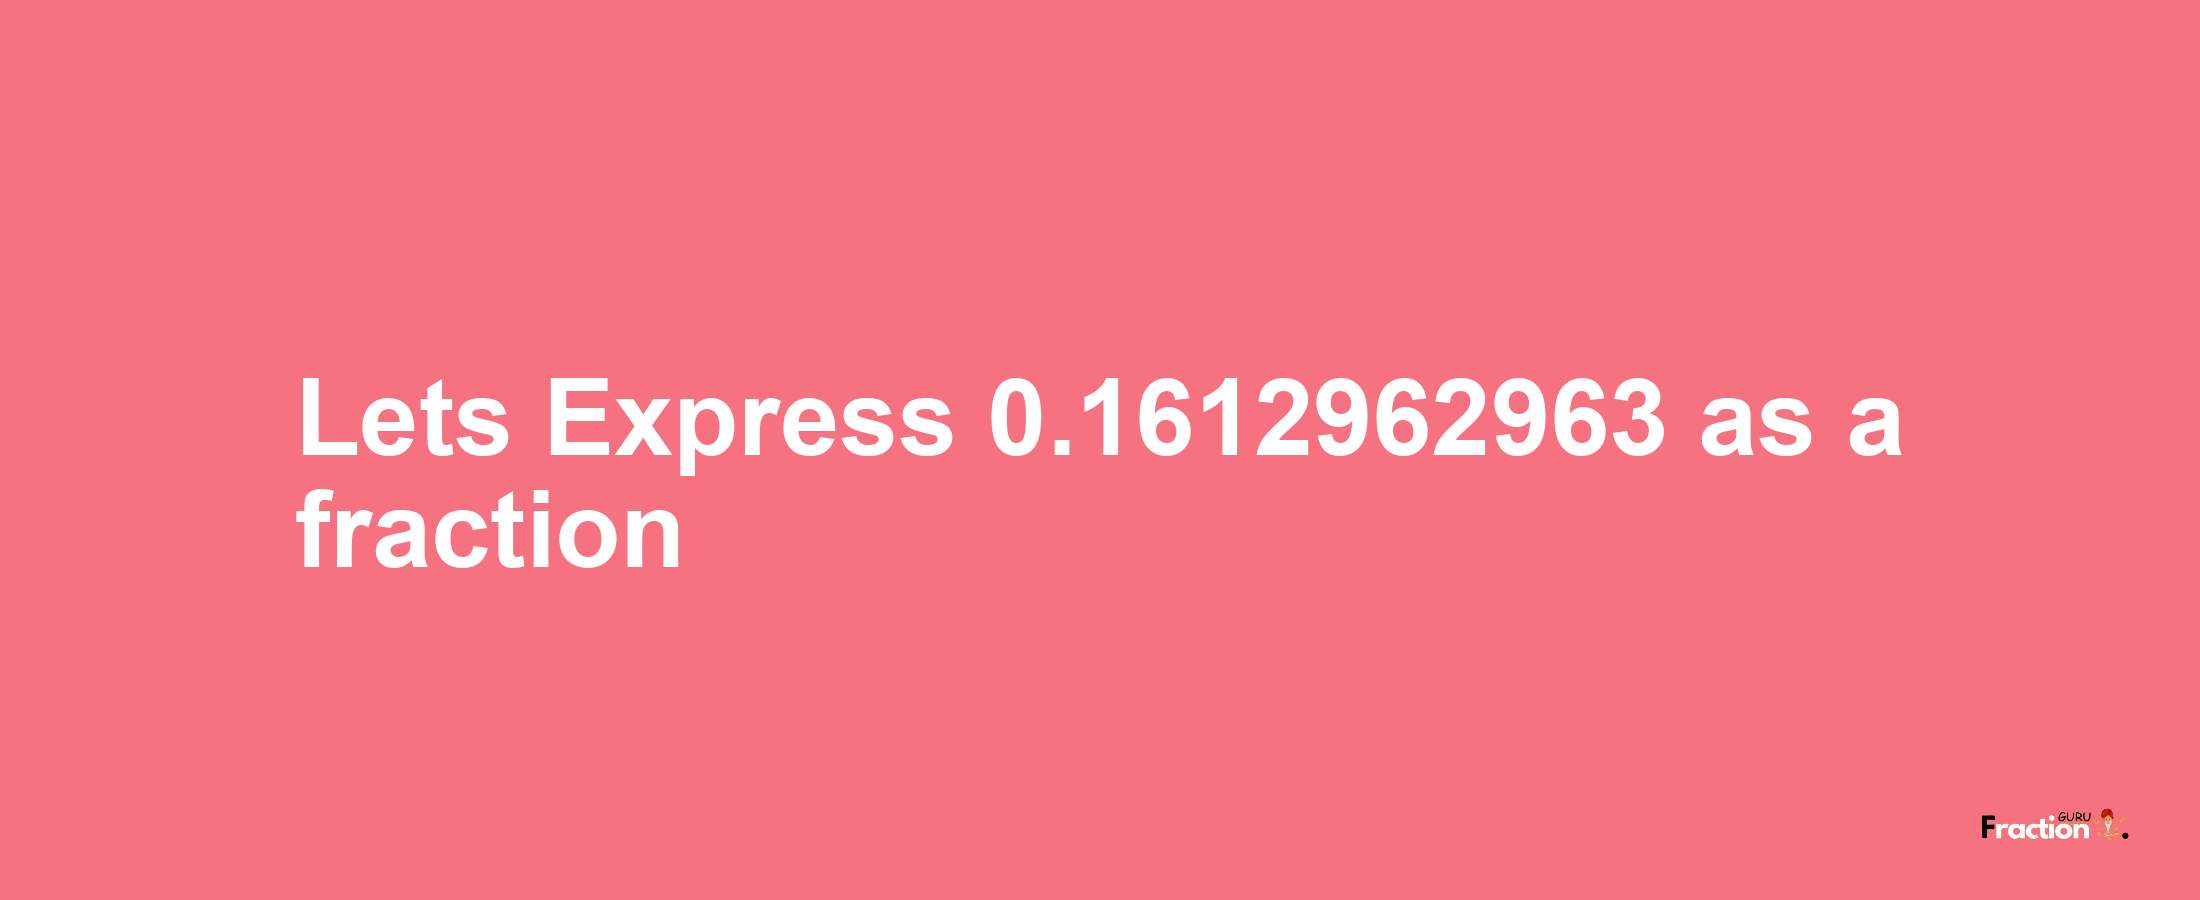 Lets Express 0.1612962963 as afraction